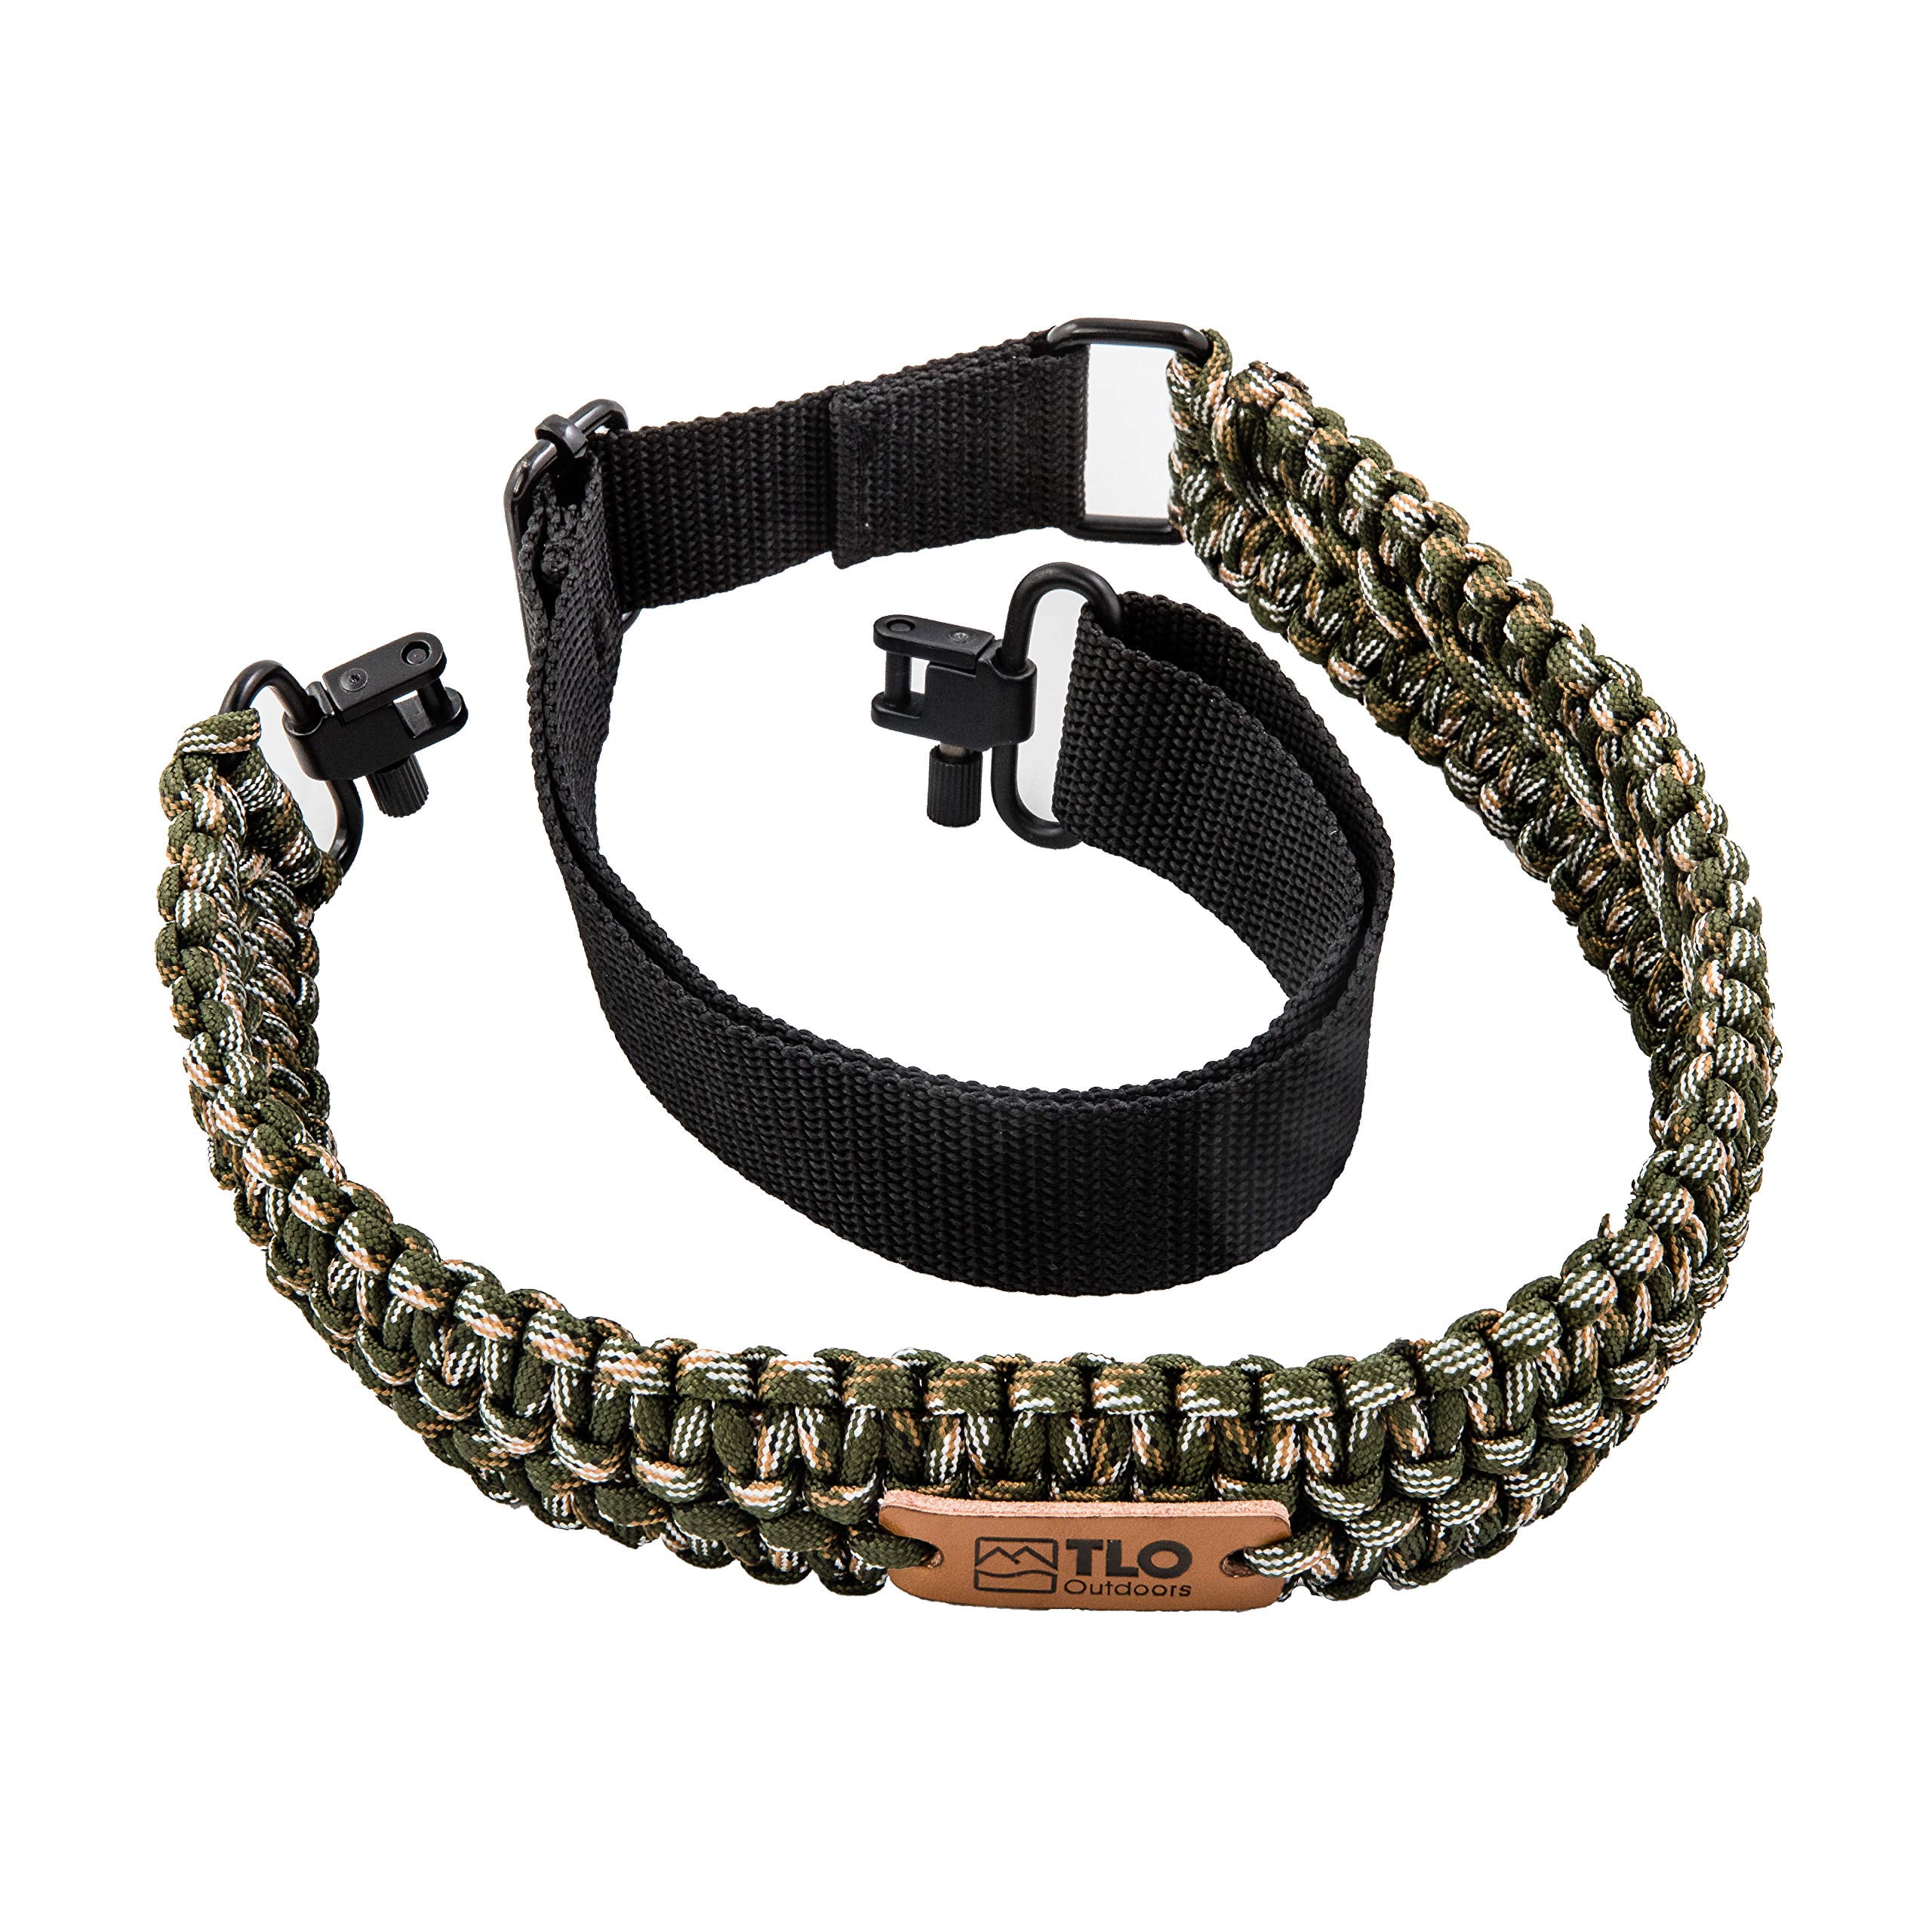 Outdoor Survival Paracord Belt Adjustable Paracord Sling Emergency Supplies with Solid Steel Buckle 